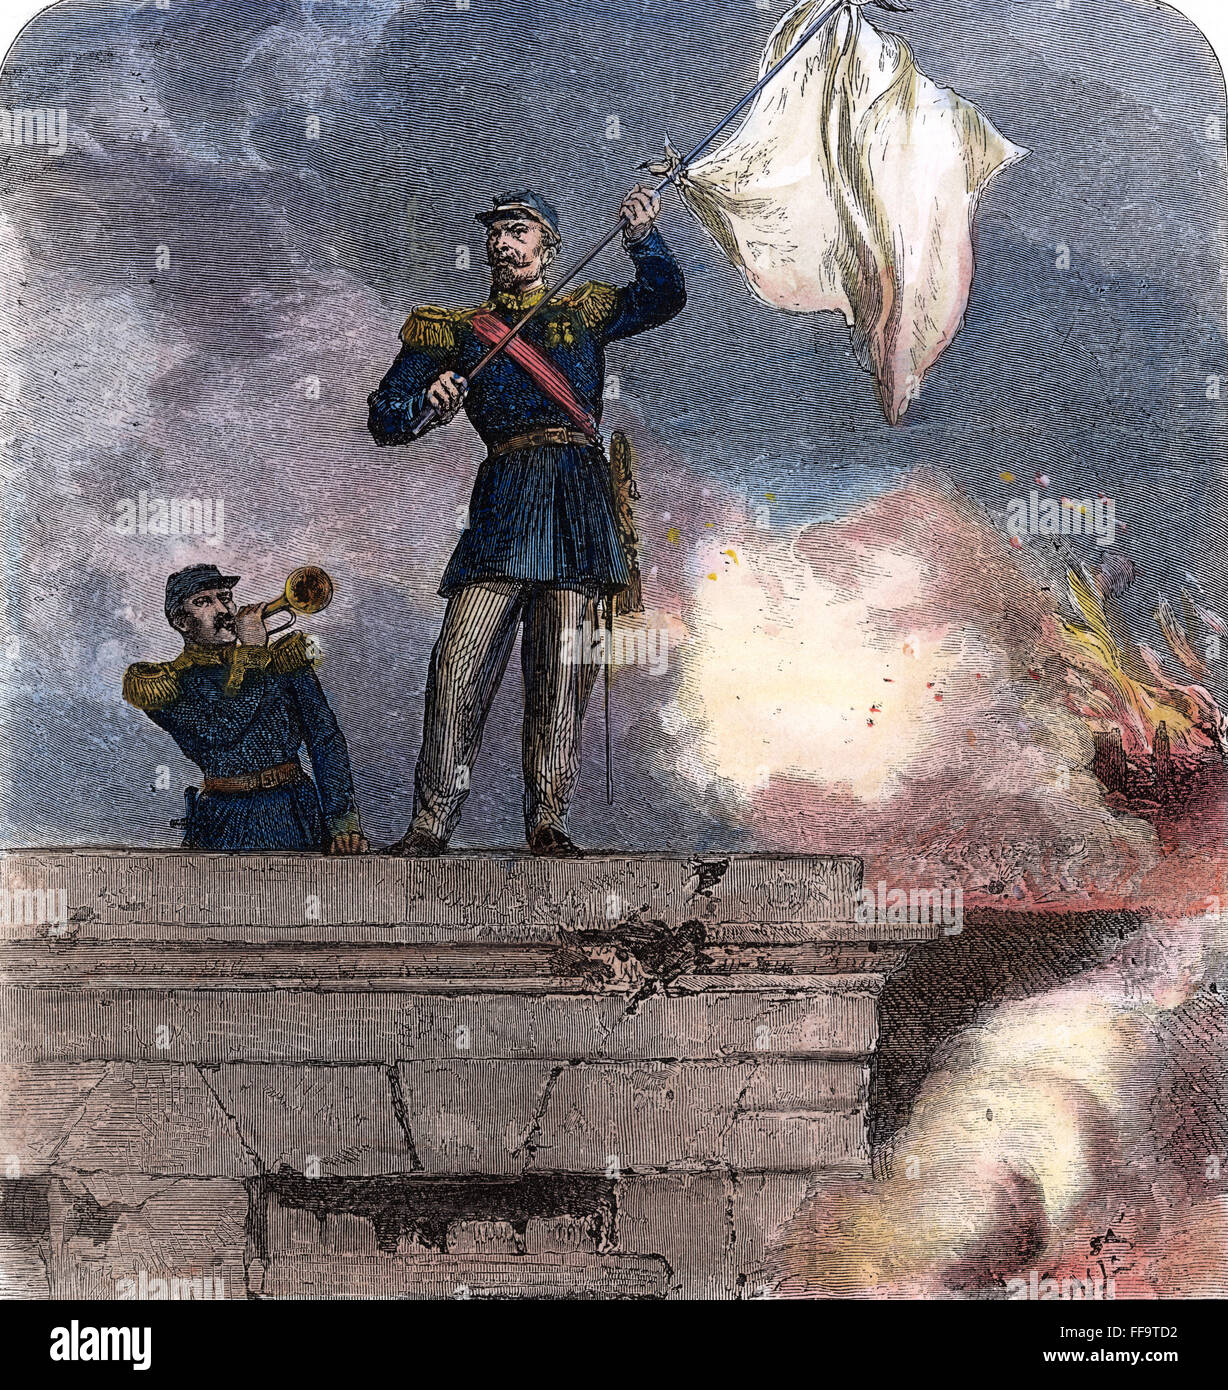 FRANCO-PRUSSIAN WAR, 1870. /nFrench General Lauriston waves the flag of truce from the gate of the fortified town of Sedan, 1 September 1870, during the Franco-Prussian War. Wood engraving from a contemporary English newspaper. Stock Photo